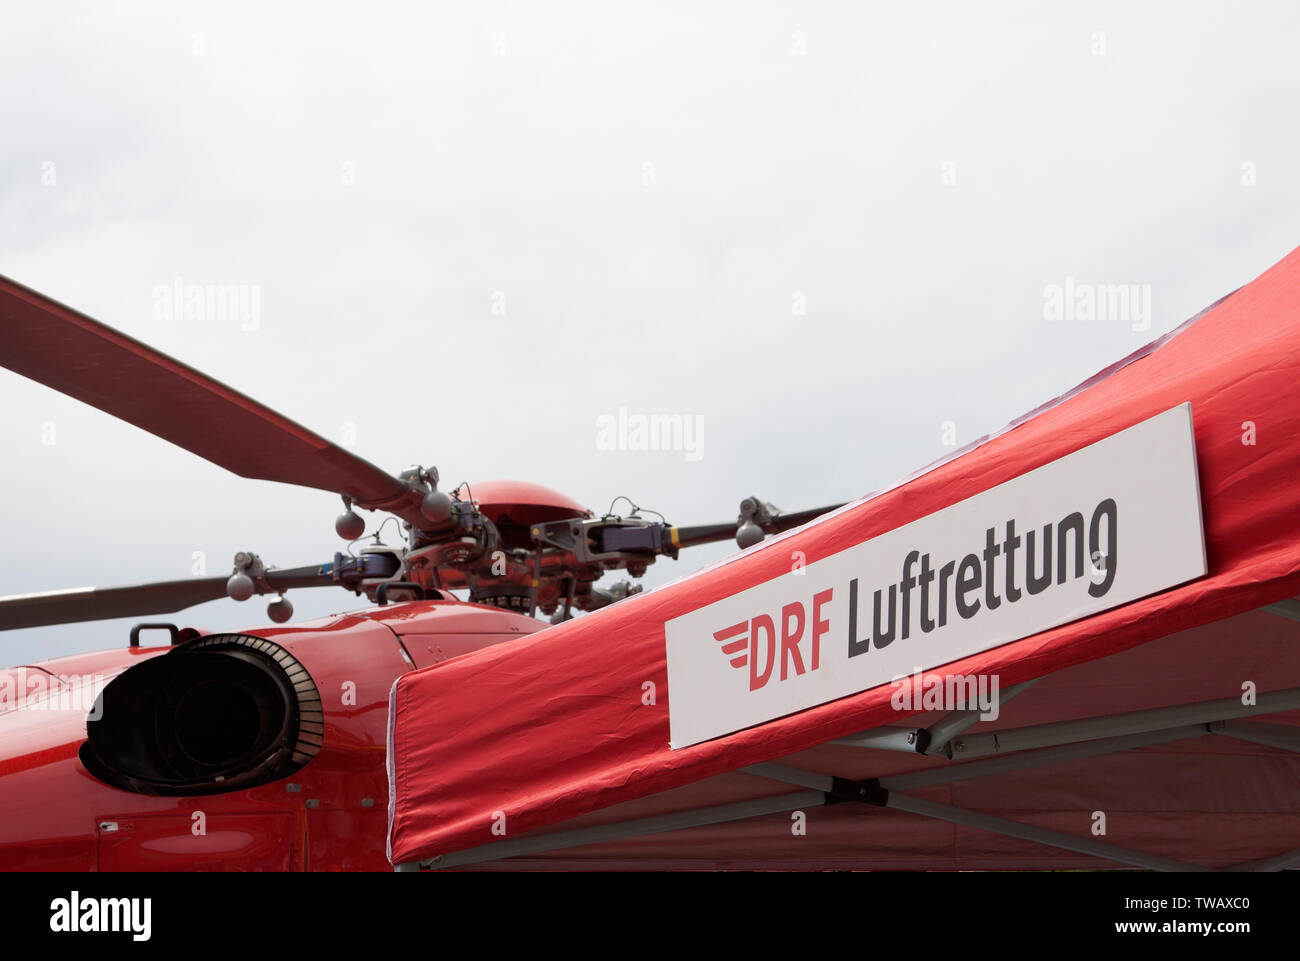 DRF Luftrettung, air rescue, Berlin, Germany Stock Photo - Alamy